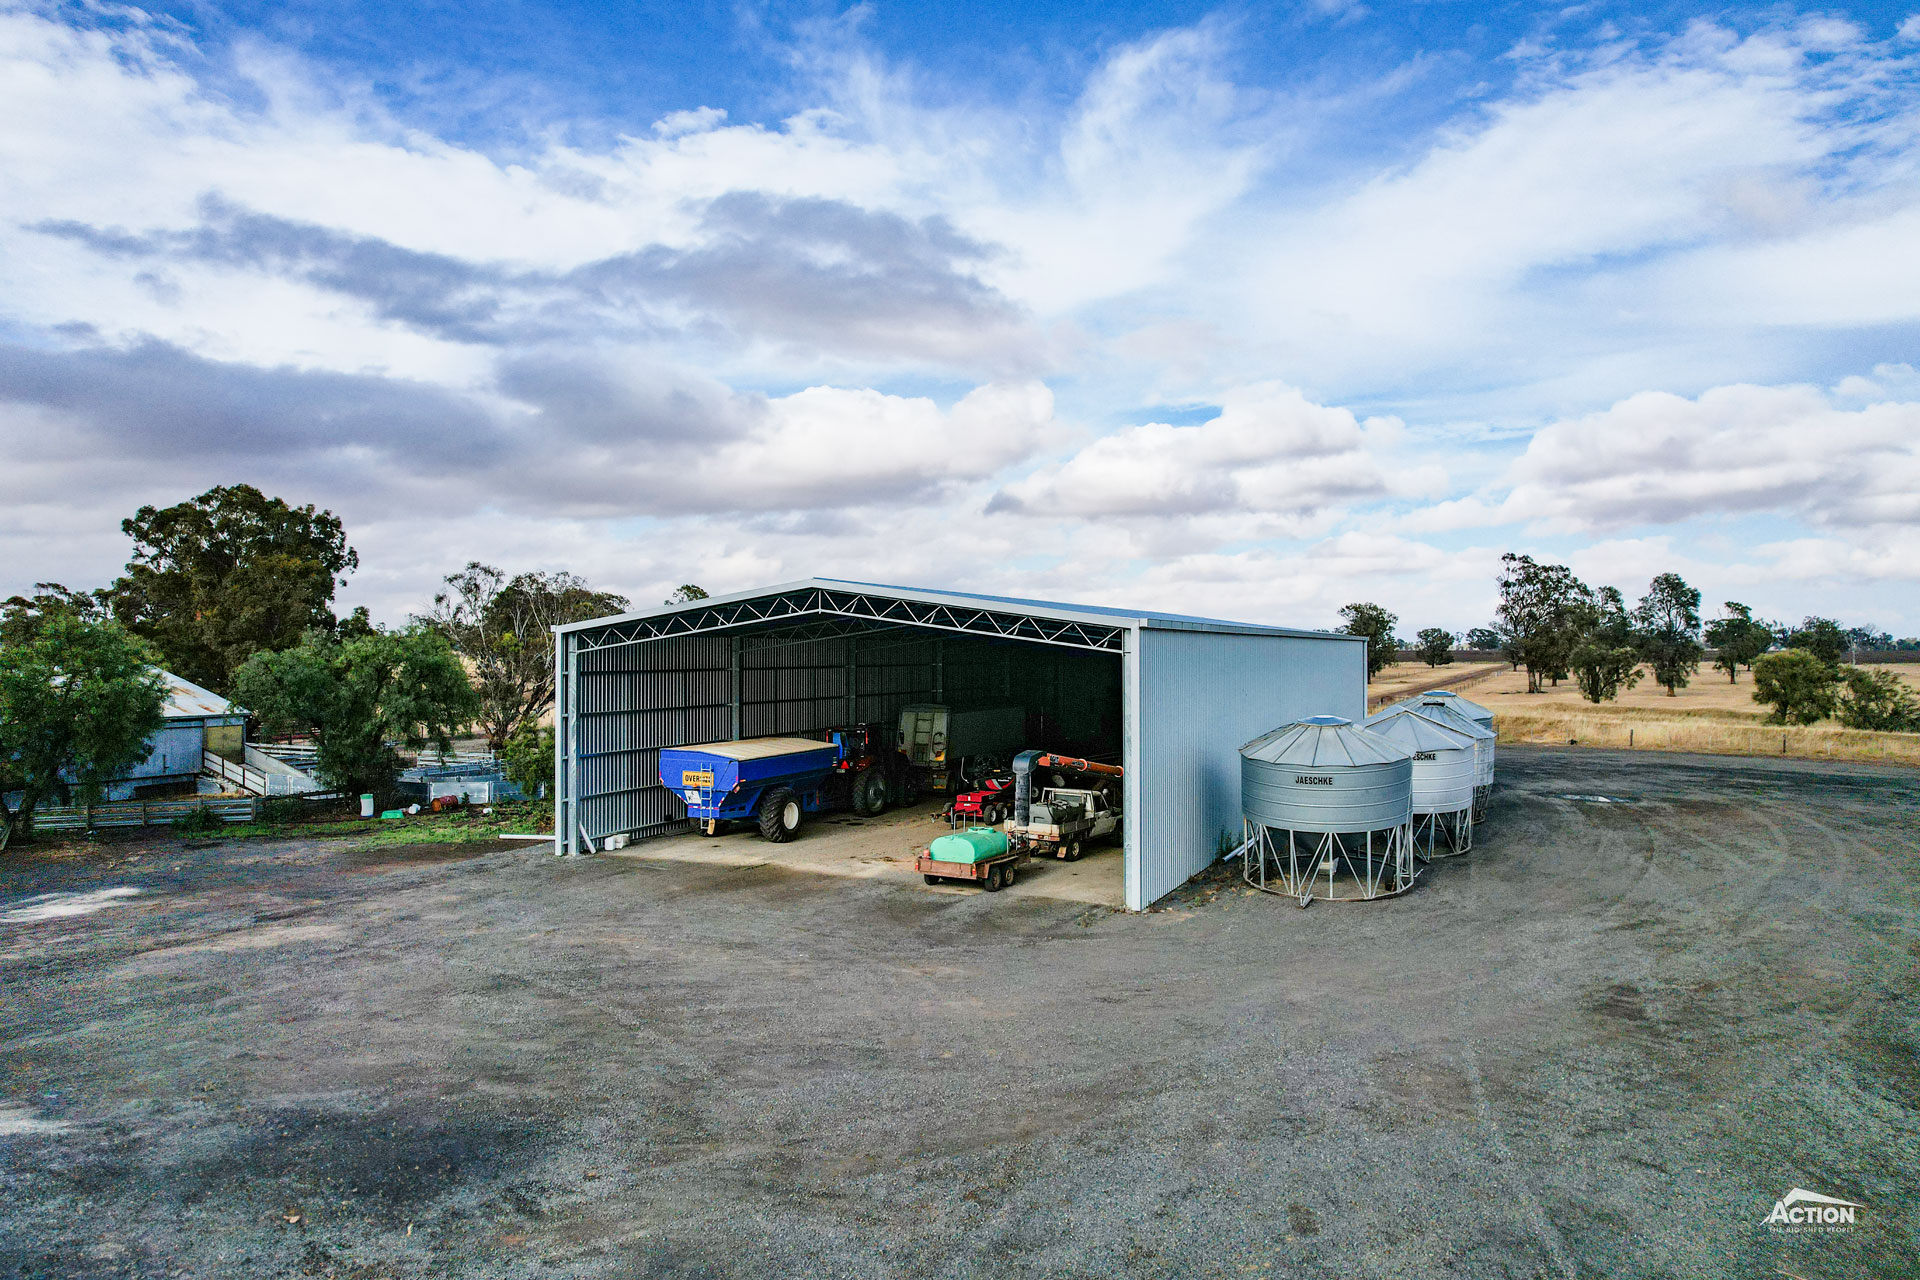 You are currently viewing 42.5m x 18m x 6.75m machinery shed